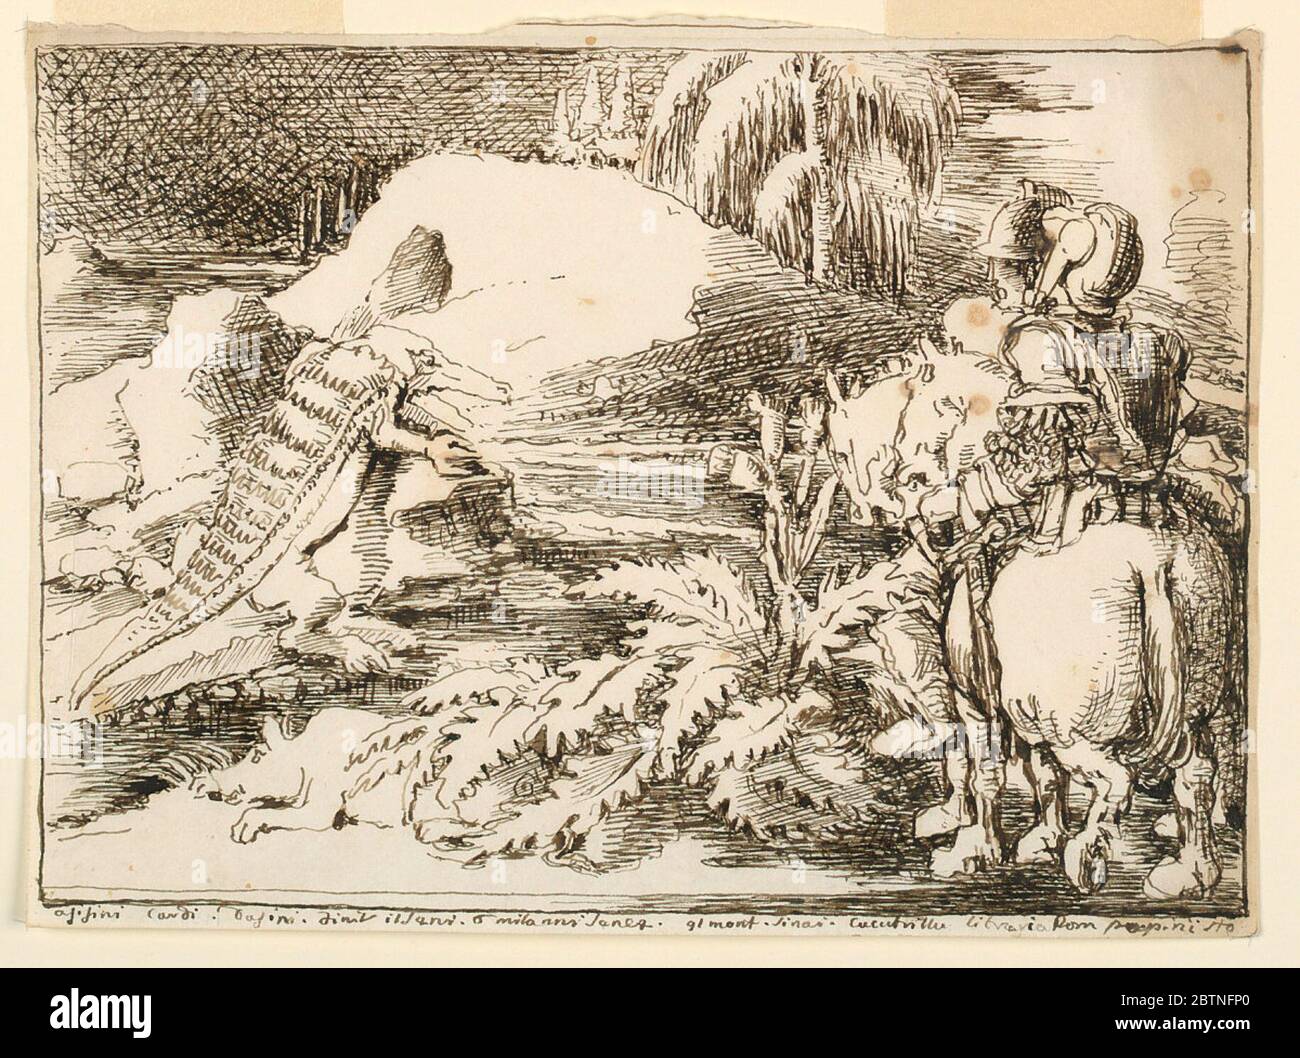 Two Knights in Armor Confronting a Crocodile and a Boar. Research in ProgressTwo knights in armor riding horses in right foreground confront a beast standing in left middle ground. Beast resembles crocodile. Background in a landscape with a hill in middle dominated by a tree. Ink border. Stock Photo